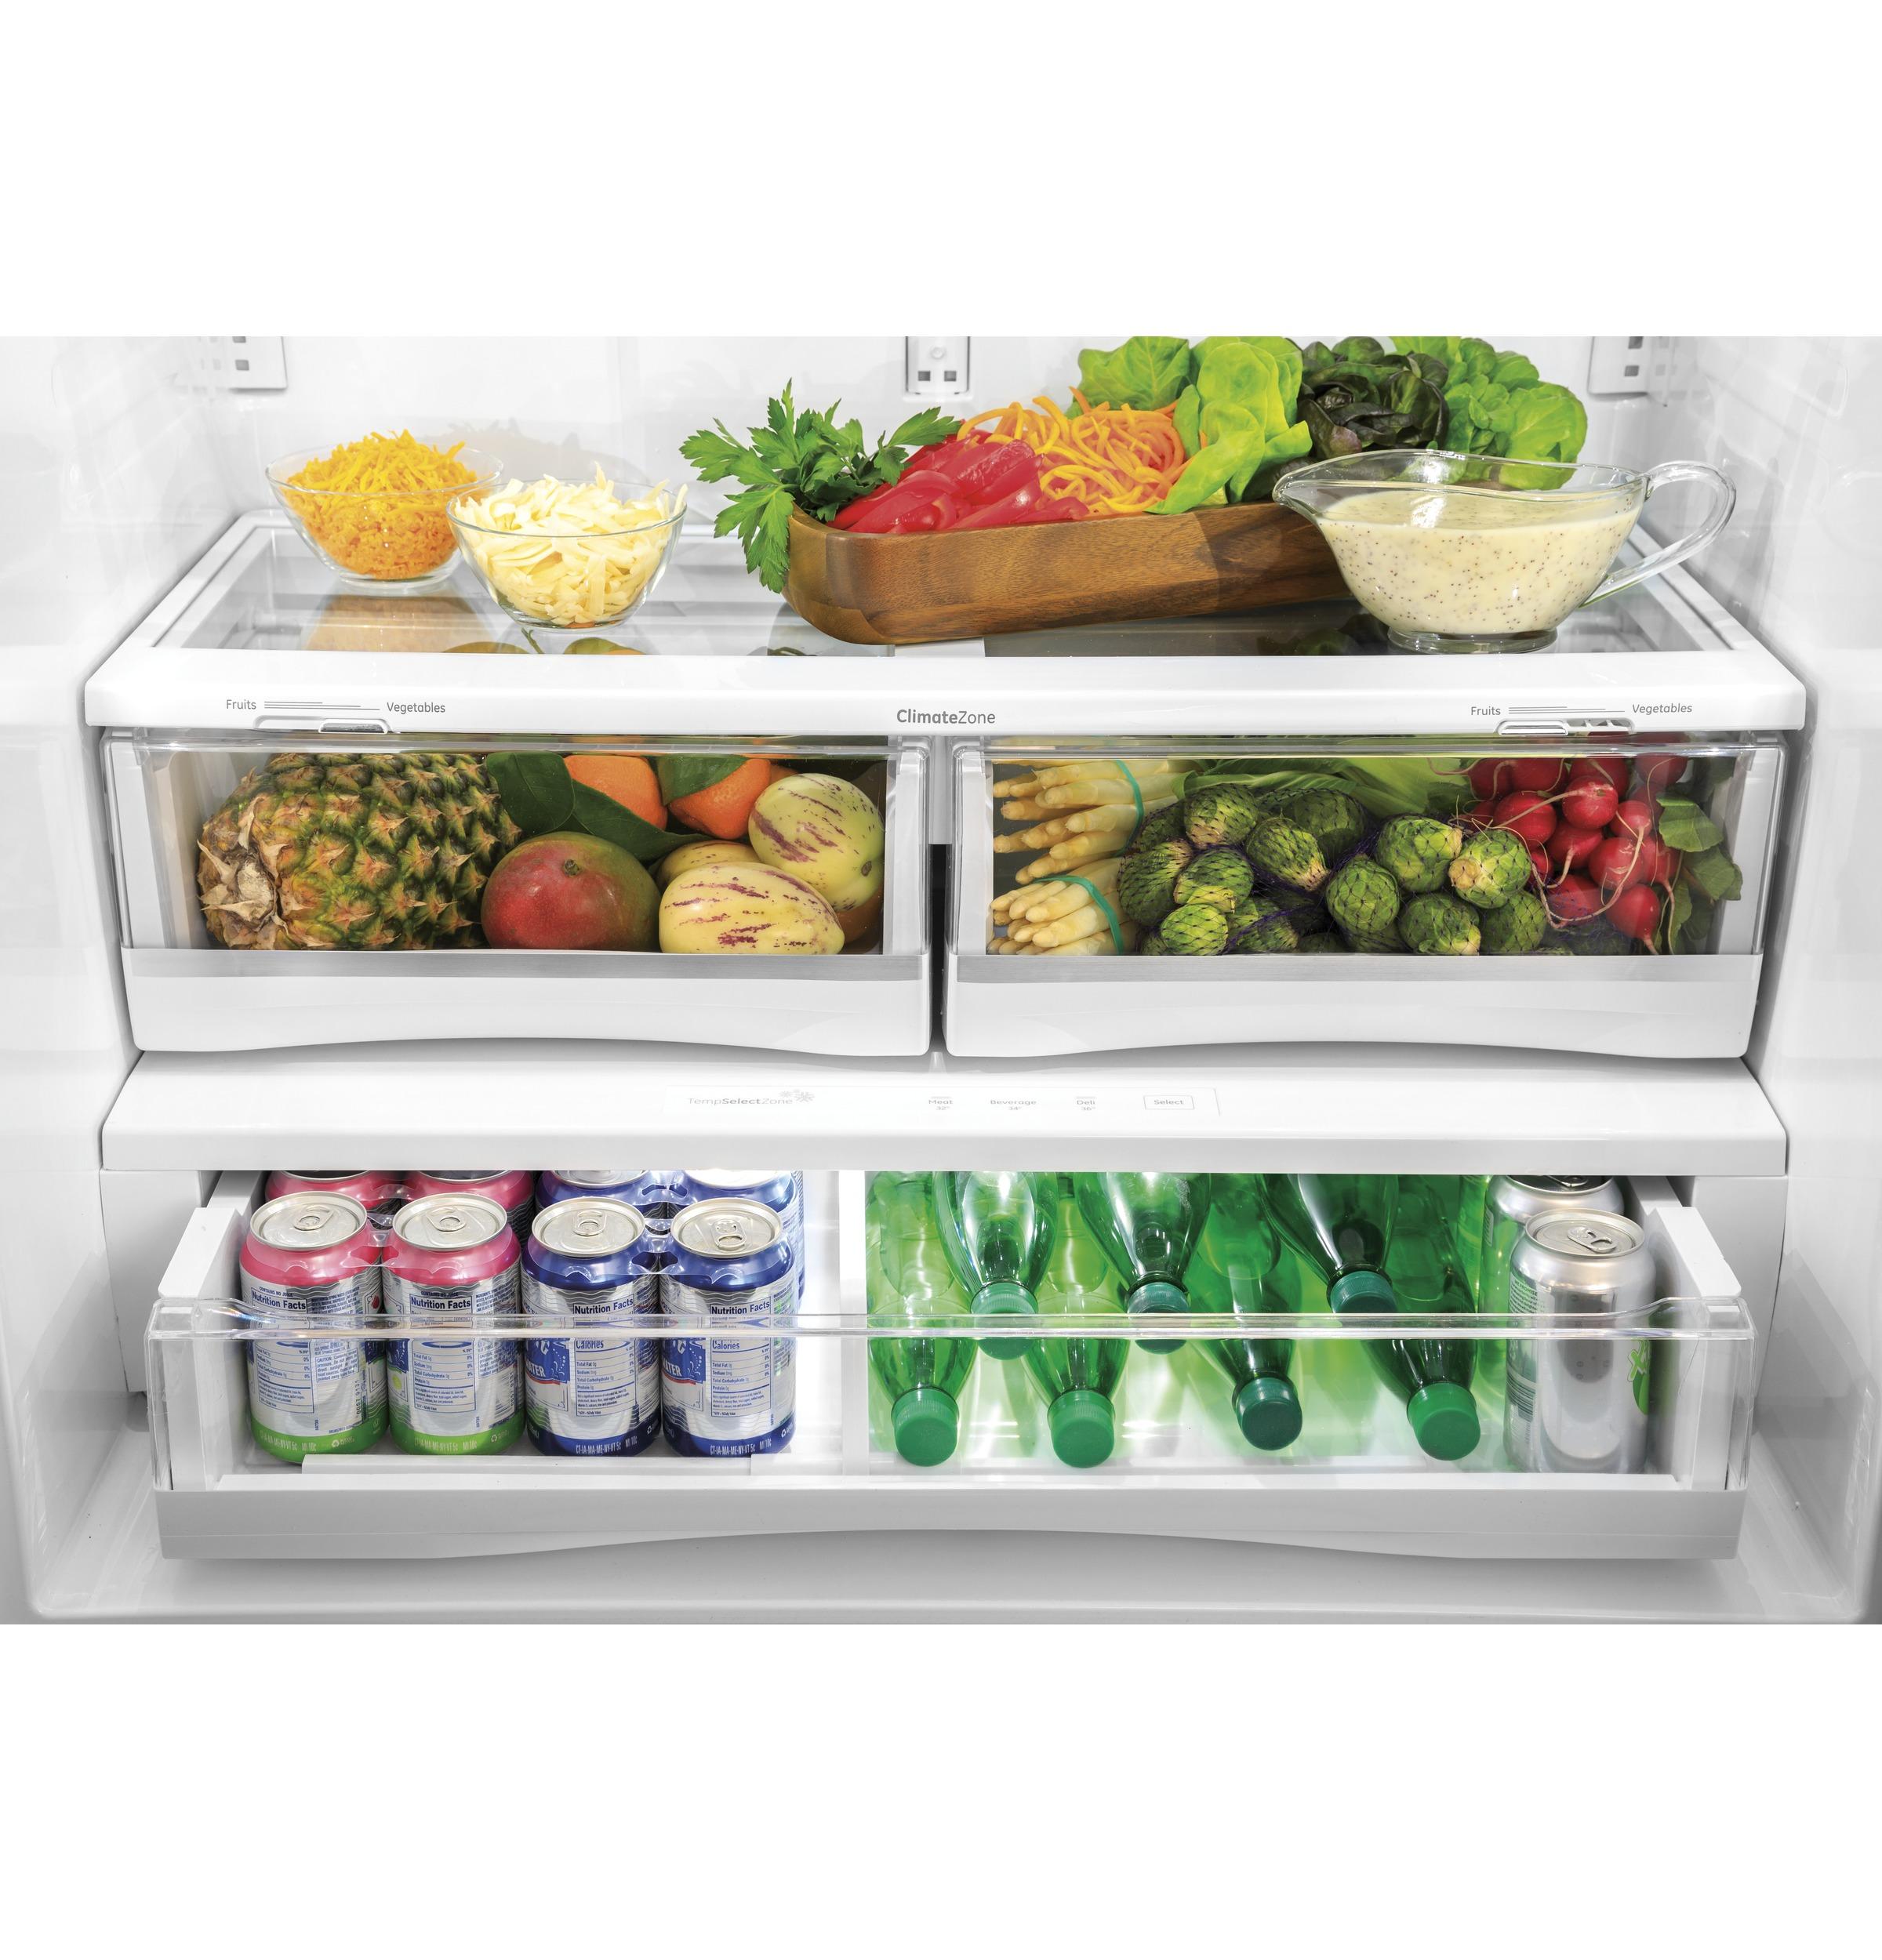 GE Profile™ Series ENERGY STAR® 22.1 Cu. Ft. Counter-Depth Fingerprint Resistant French-Door Refrigerator with Hands-Free AutoFill